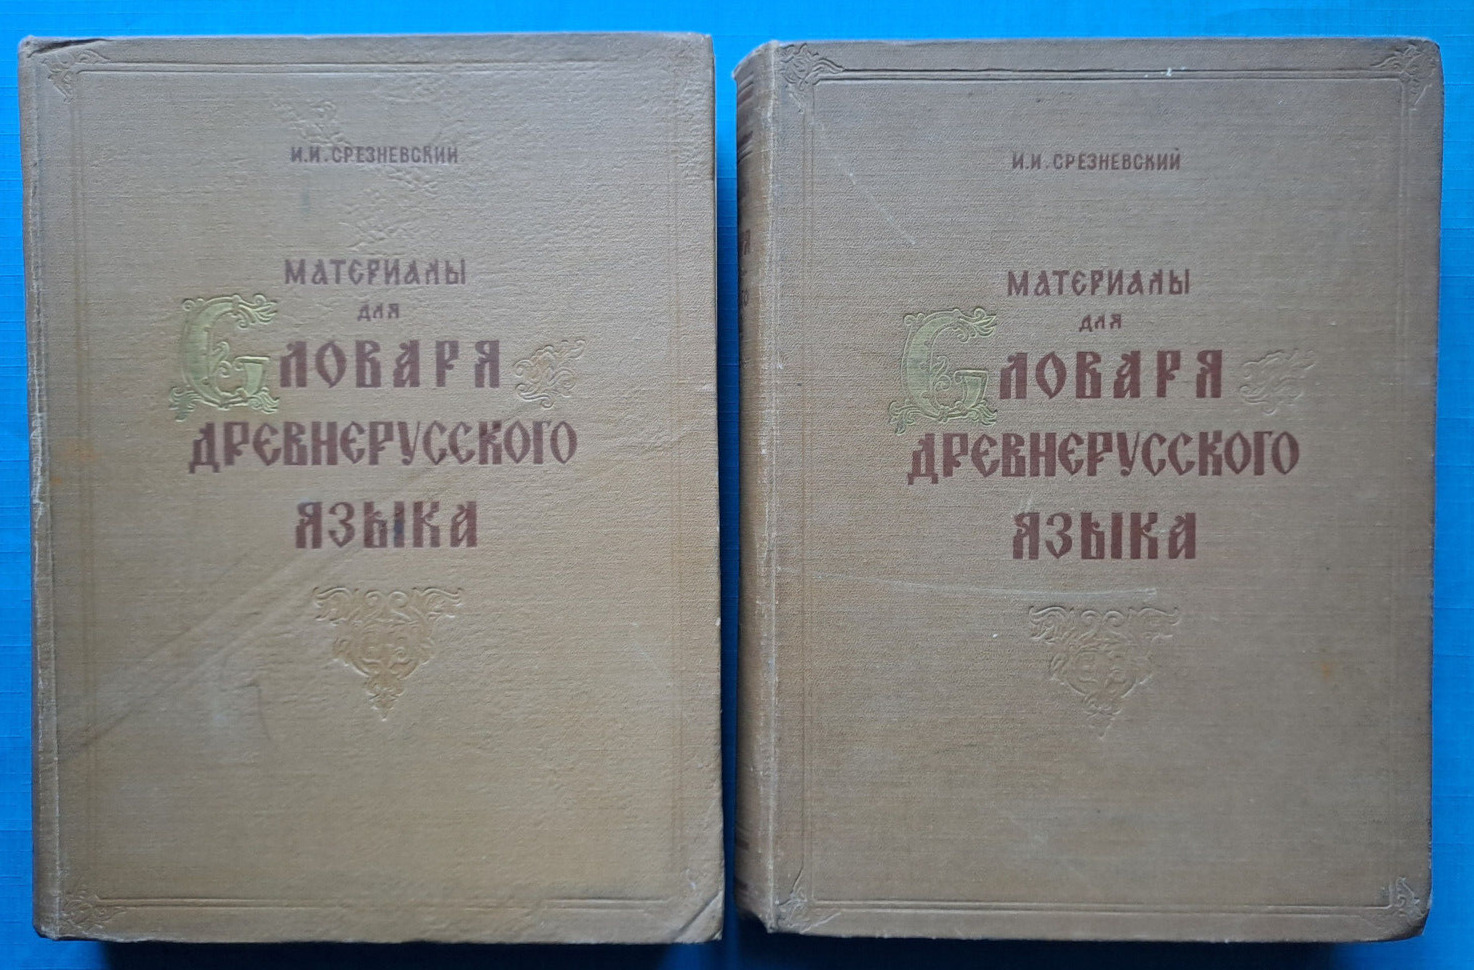 1958 Sreznevsky Dictionary of Old Russian language 1-2 vol. Reprint 1893 book